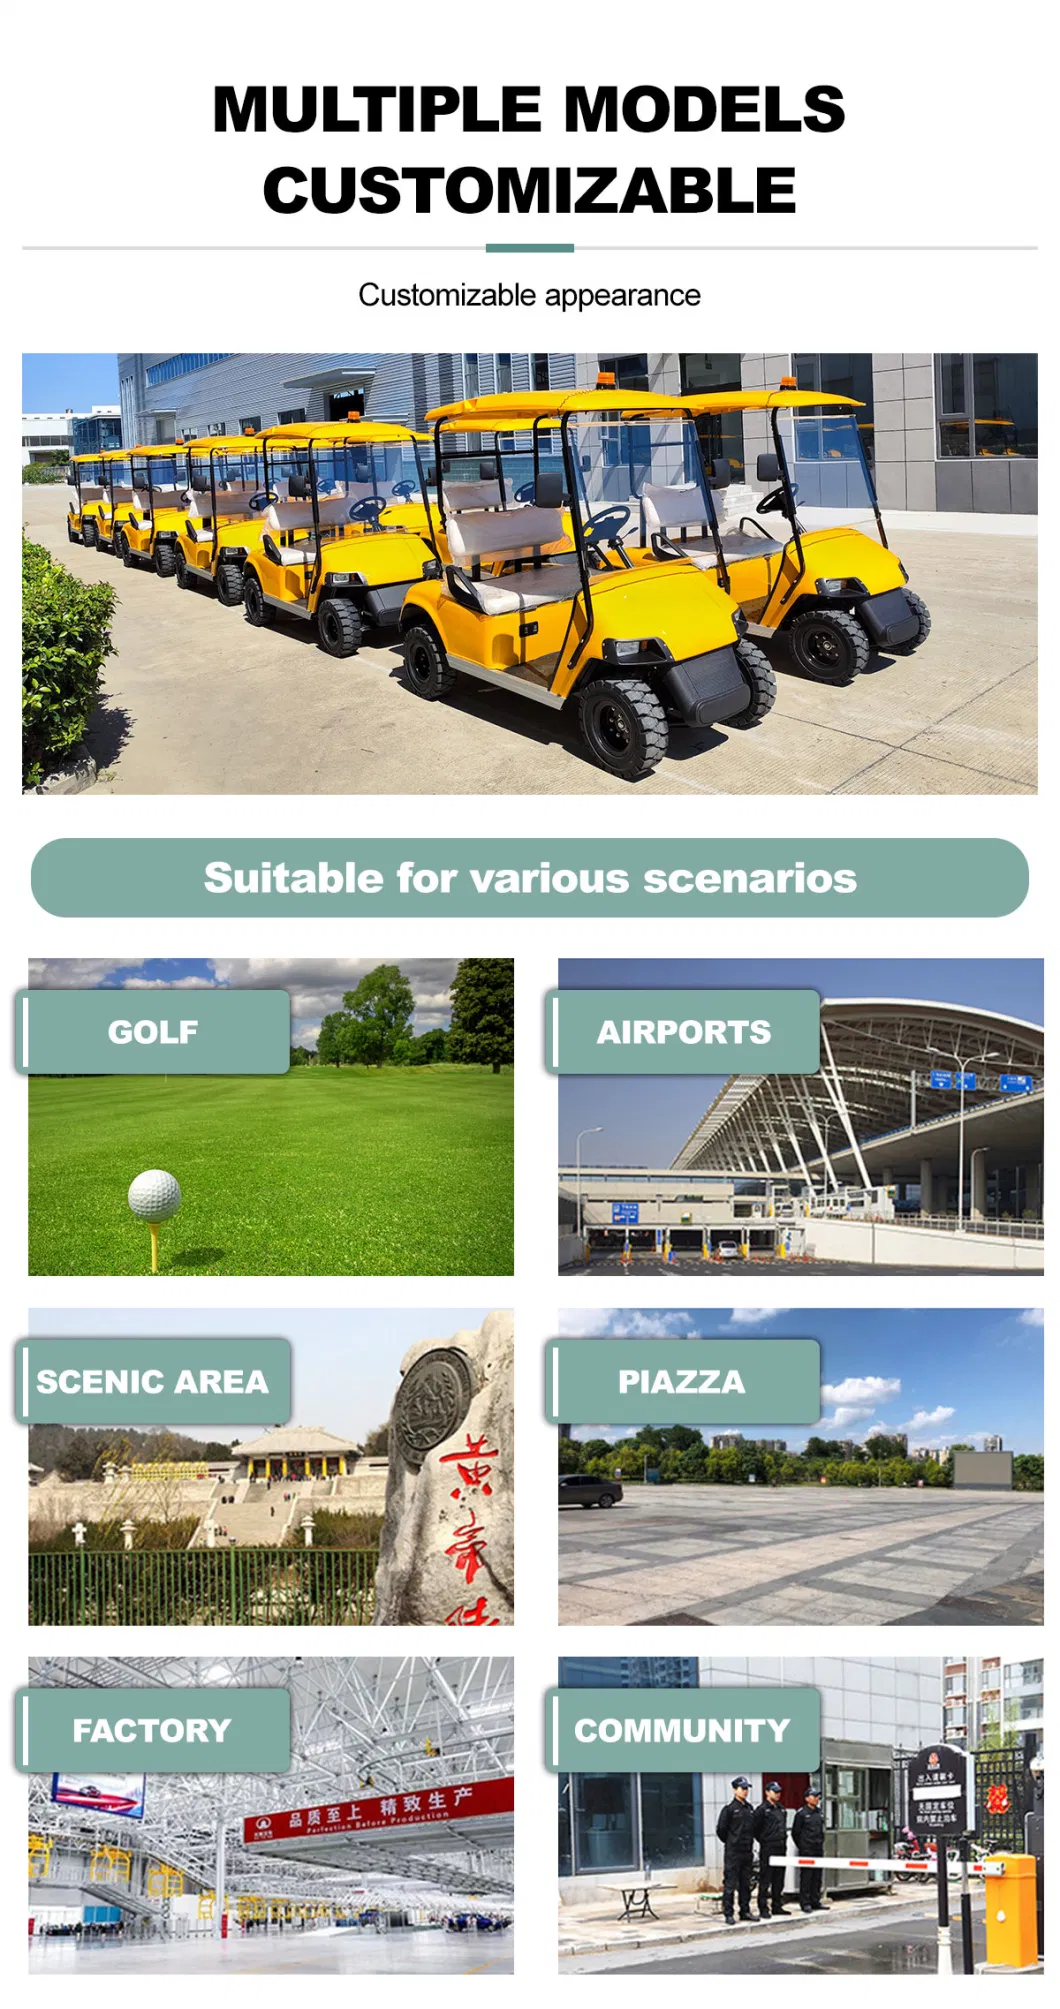 Approved Quality Certification Sightseeing Bus Lsv Street Legal Motorised Performance Golf Carts for Beach Zone All Terrain Coastal Community Hunting